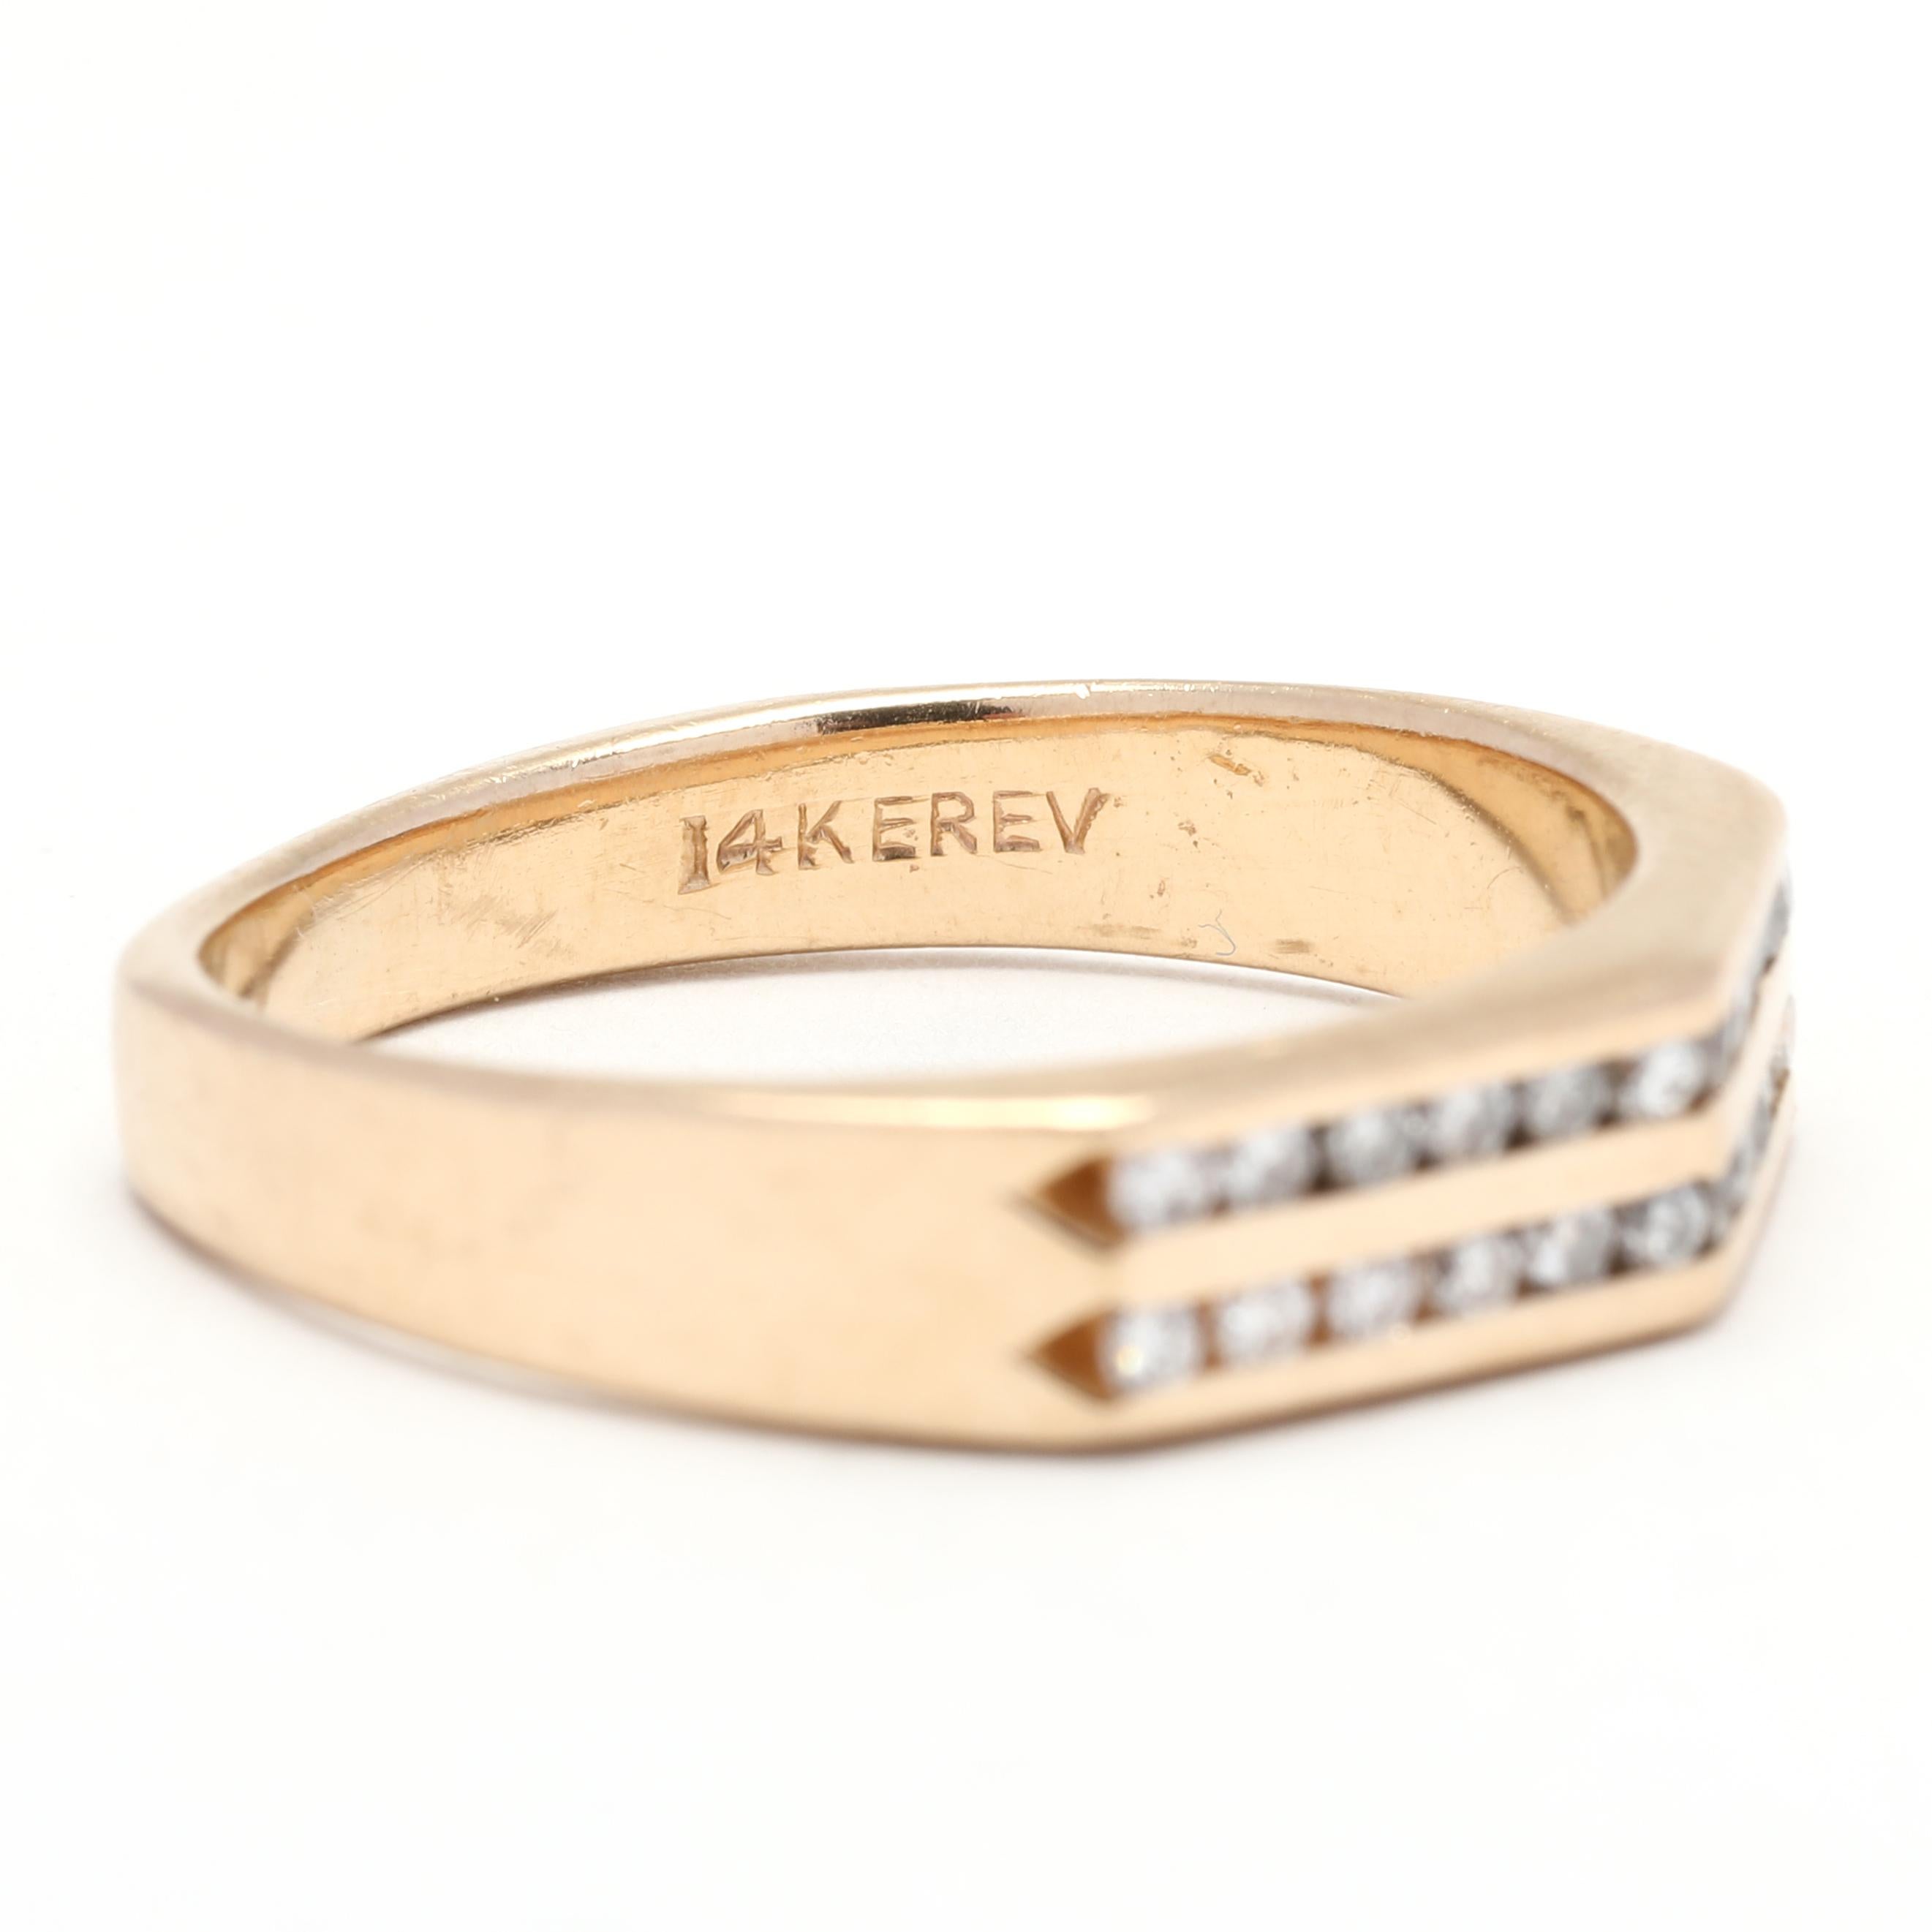 This stunning 0.25ctw double row diamond pyramid band is perfect for adding a touch of sparkle to your hand. Crafted in 14K yellow gold, this stackable ring features a simple, timeless design that can be worn alone or stacked with other rings. The